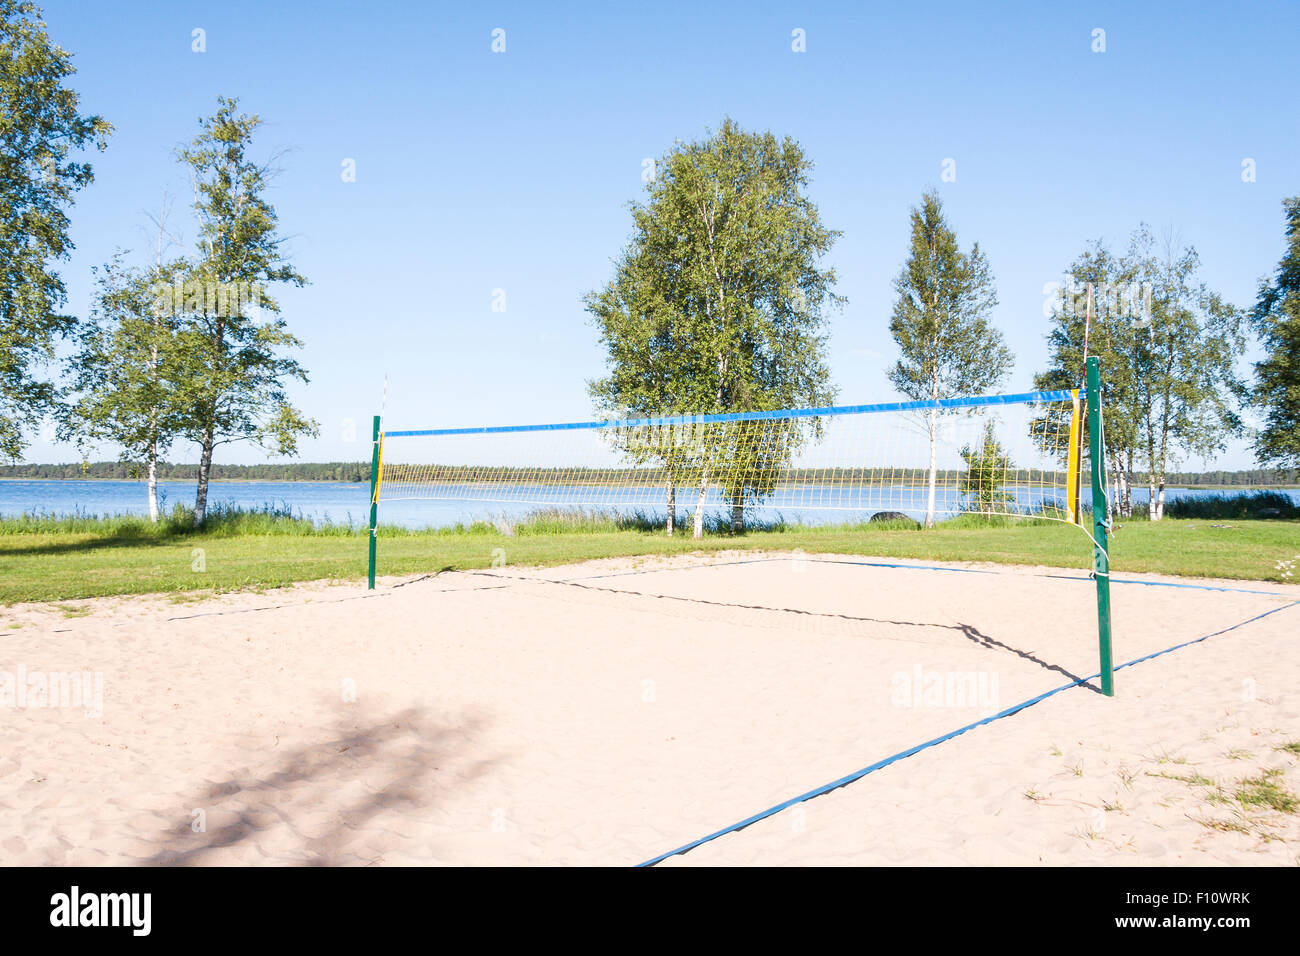 Sandy volleyball field at a lake coast surrounded by grass in a sunny summer day Stock Photo